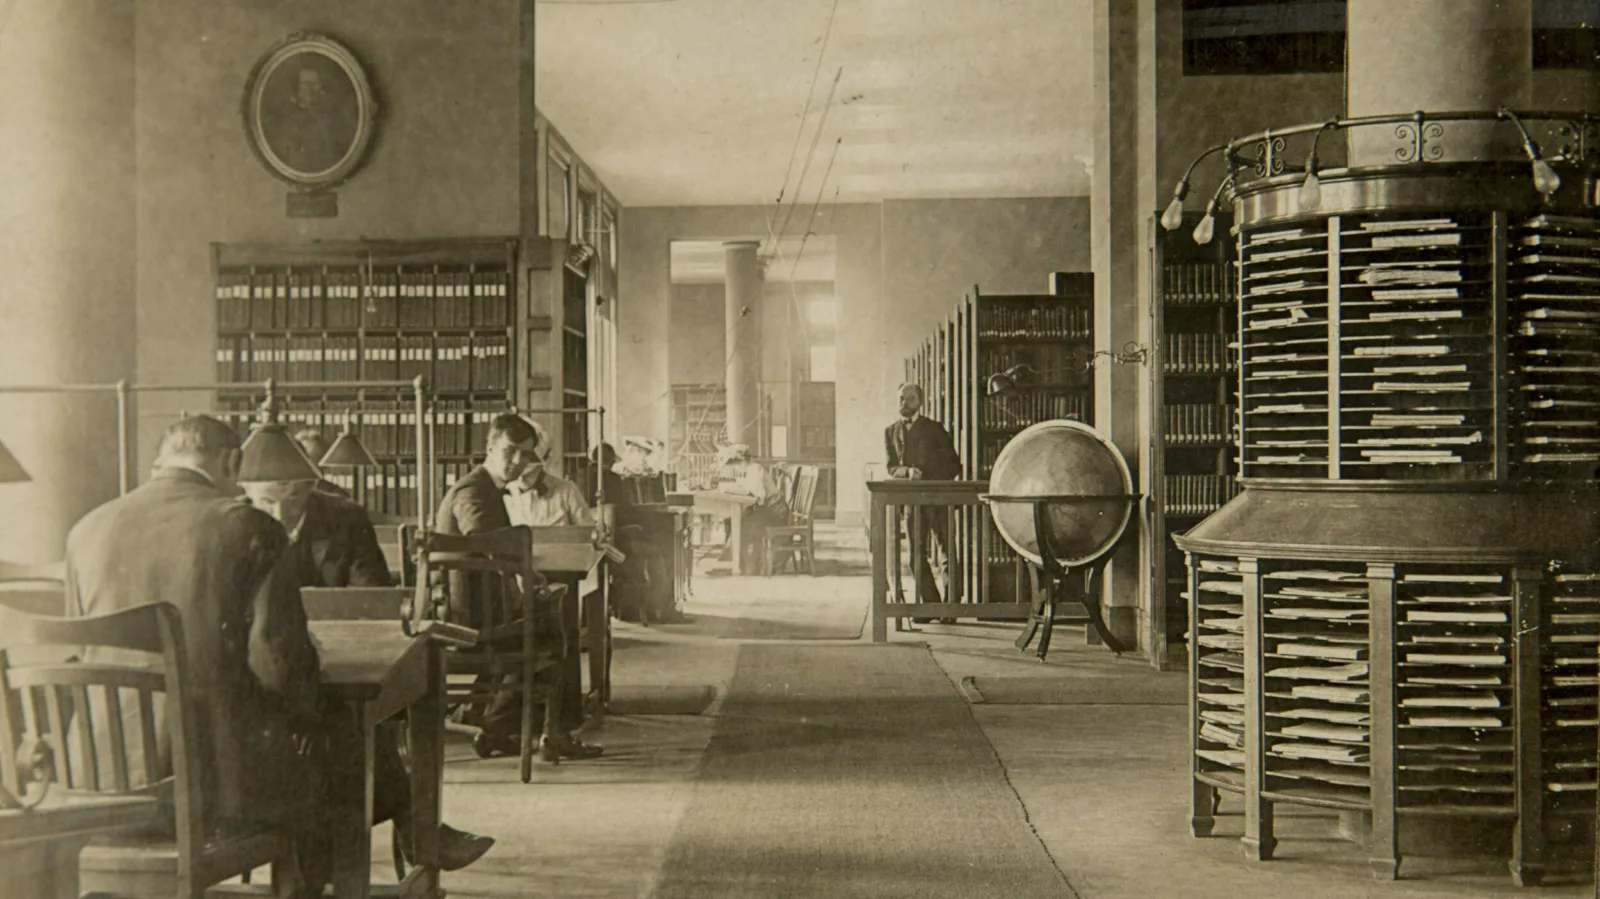 An old photo from around 1900 shows several people studying at desks. One person looks over his right shoulder at the photographer.